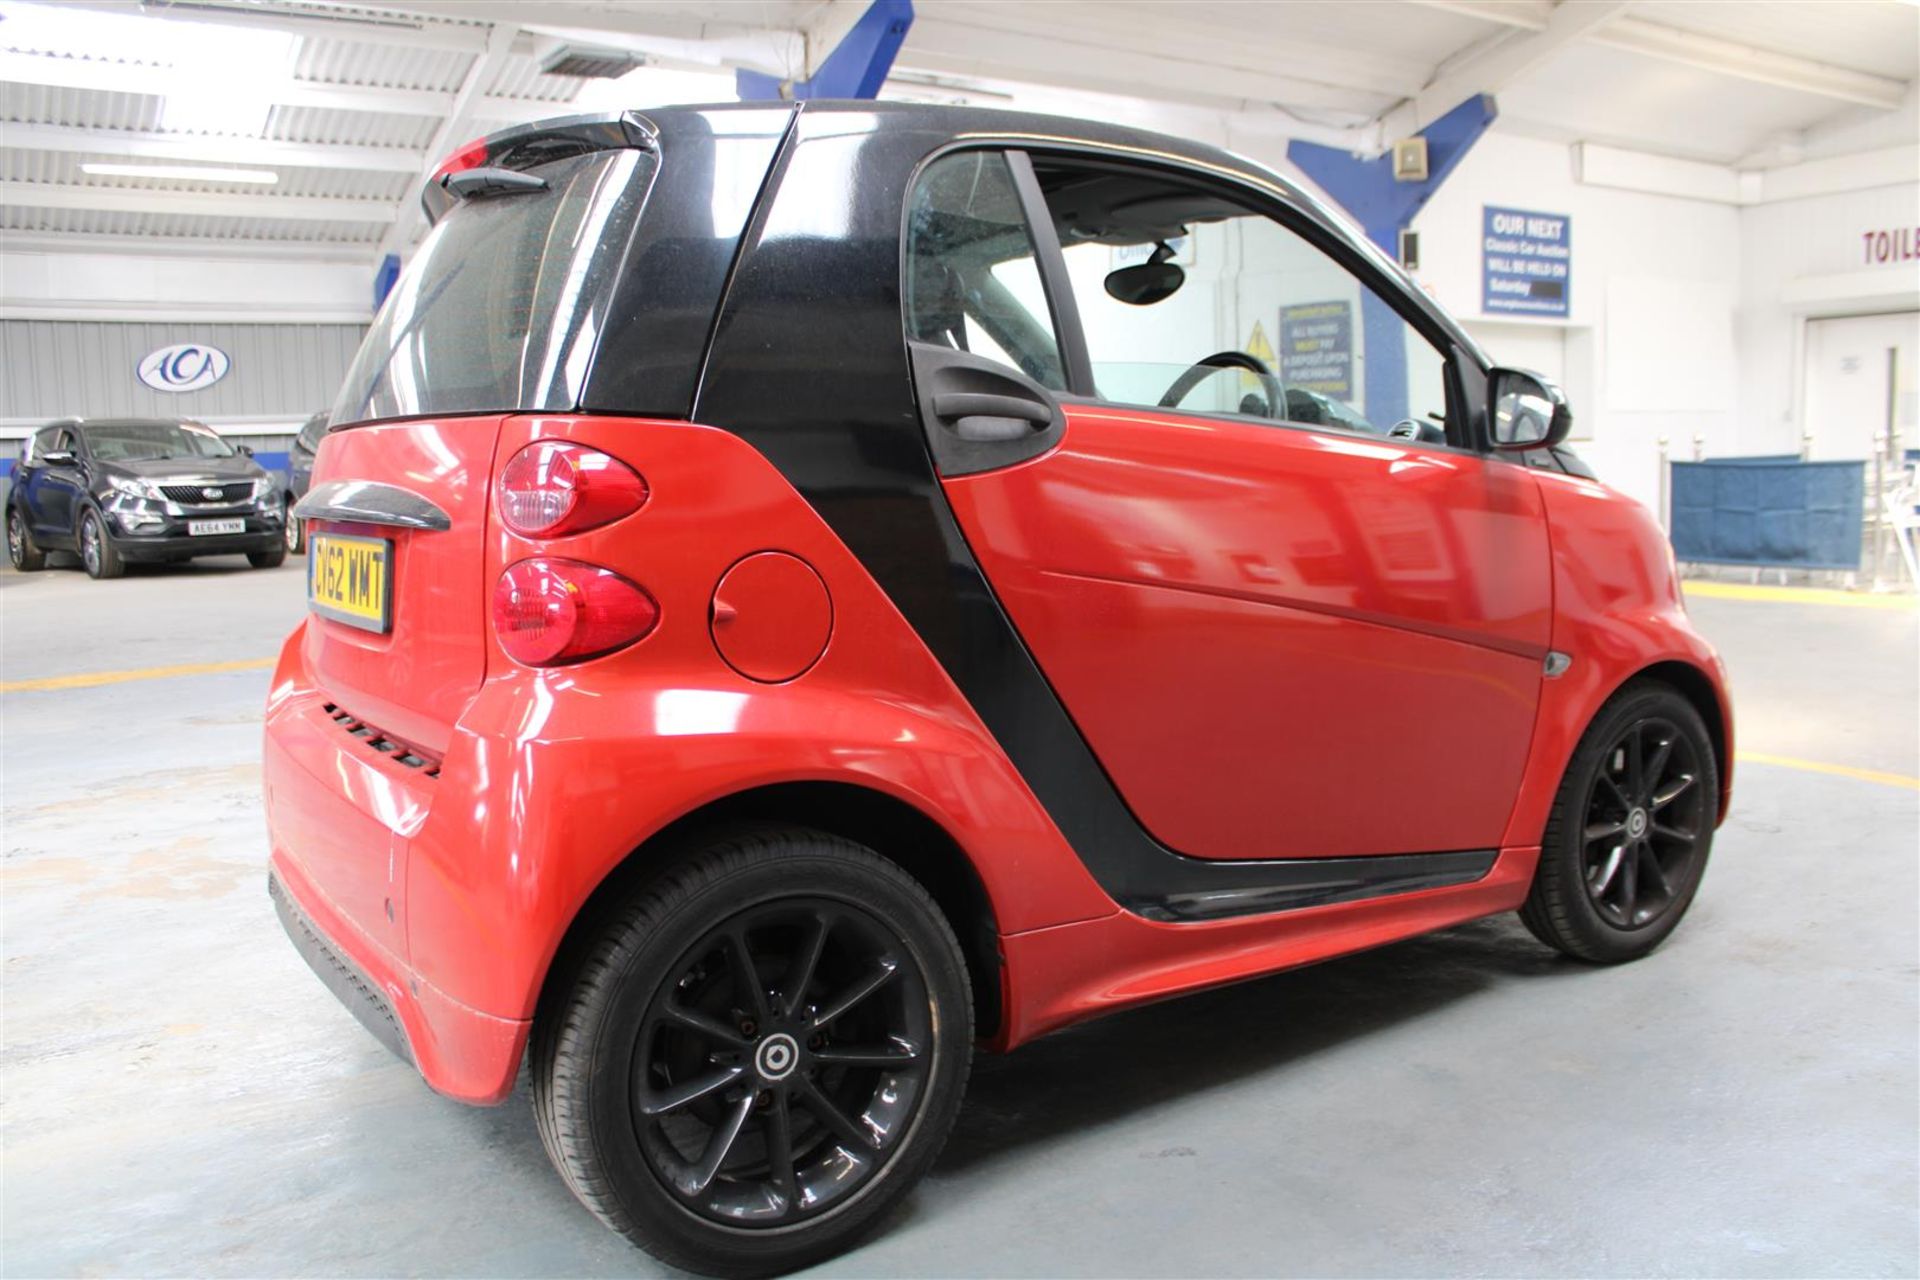 62 12 Smart Fortwo Passion MHD - Image 24 of 27